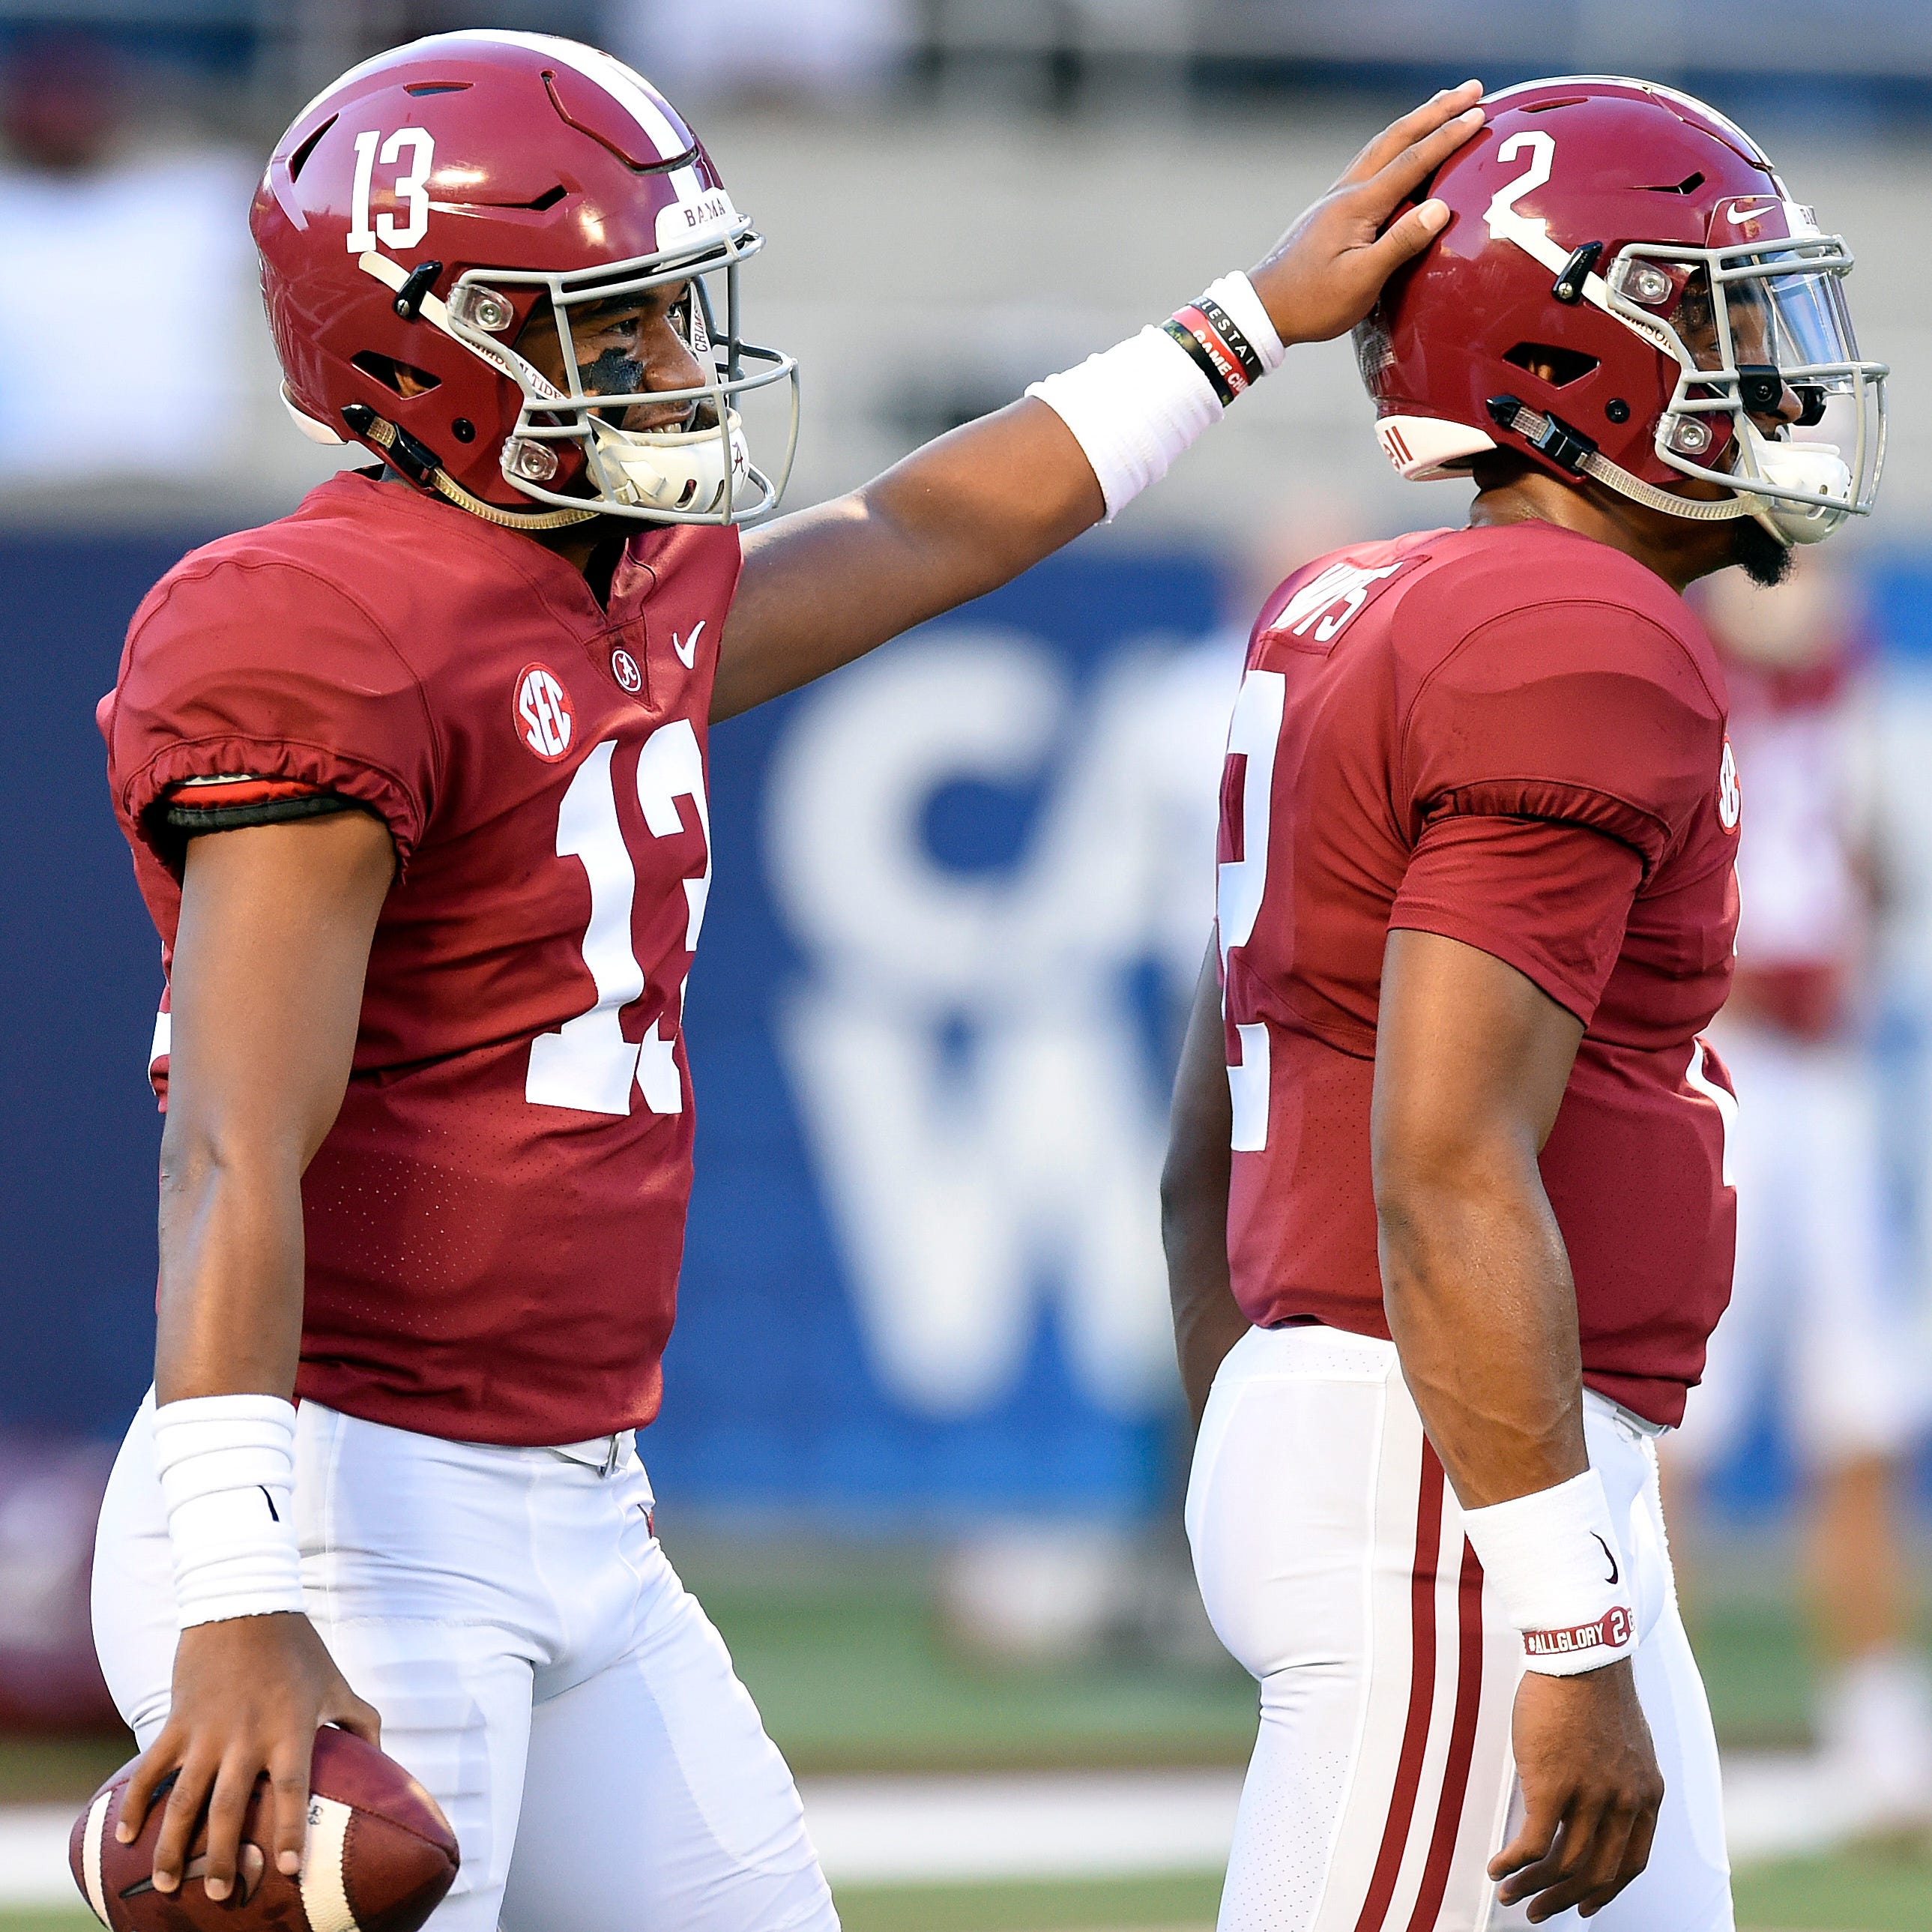 Alabama Crimson Tide quarterbacks Jalen Hurts (2) and Tua Tagovailoa (13) interact before the start of their game against the Louisville Cardinals at Camping World Stadium.